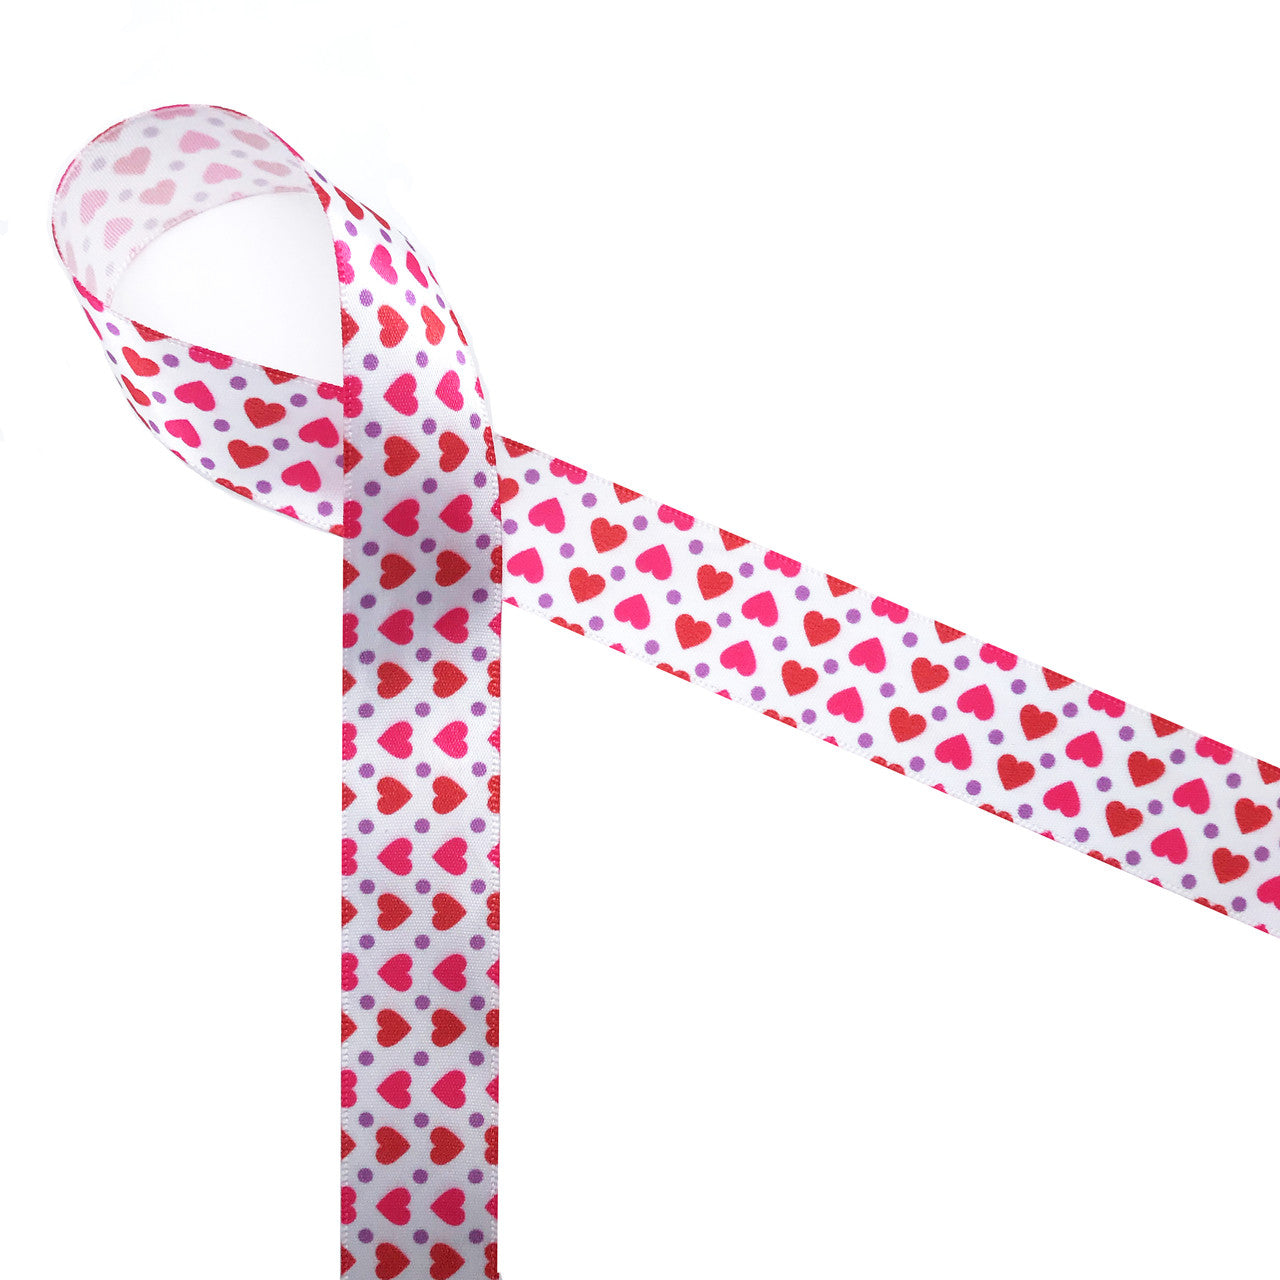 Hot Pink Gingham check on7/8 white single face satin, 10 yards